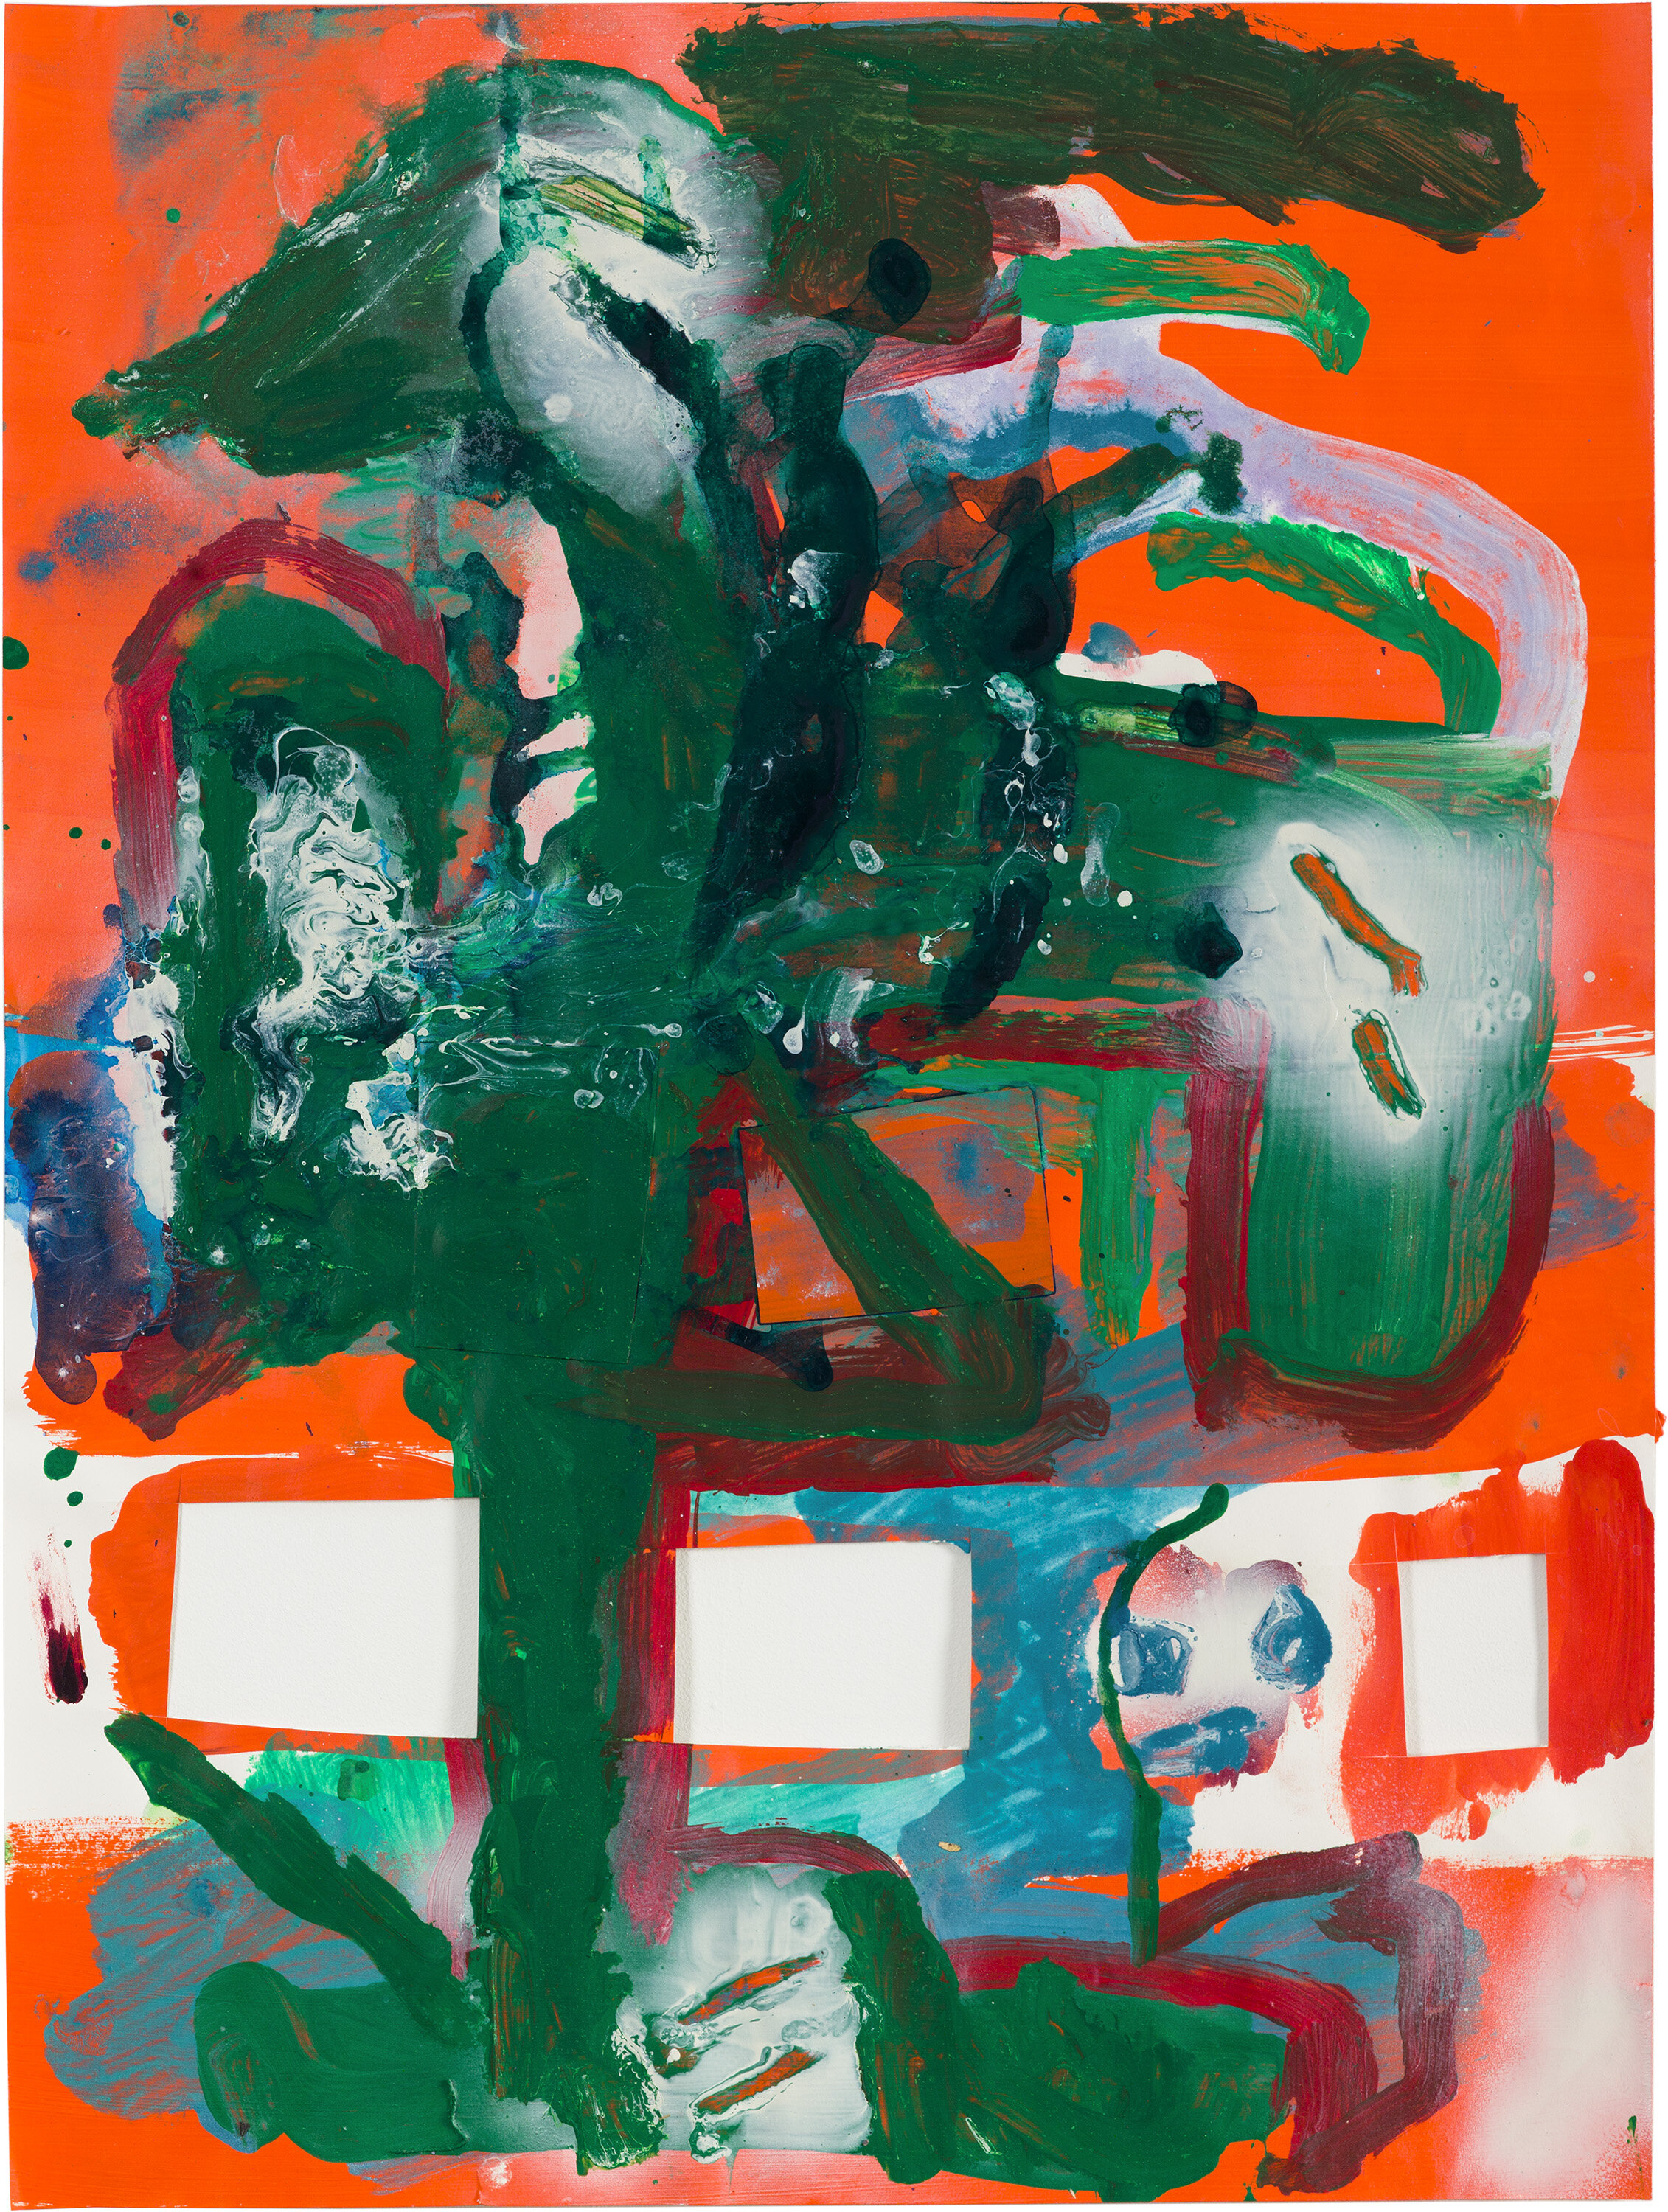  Drew Beattie and Ben Shepard   DBBS-DRW-2015-093   2015  acrylic and spray paint on paper  24 x 18 inches 